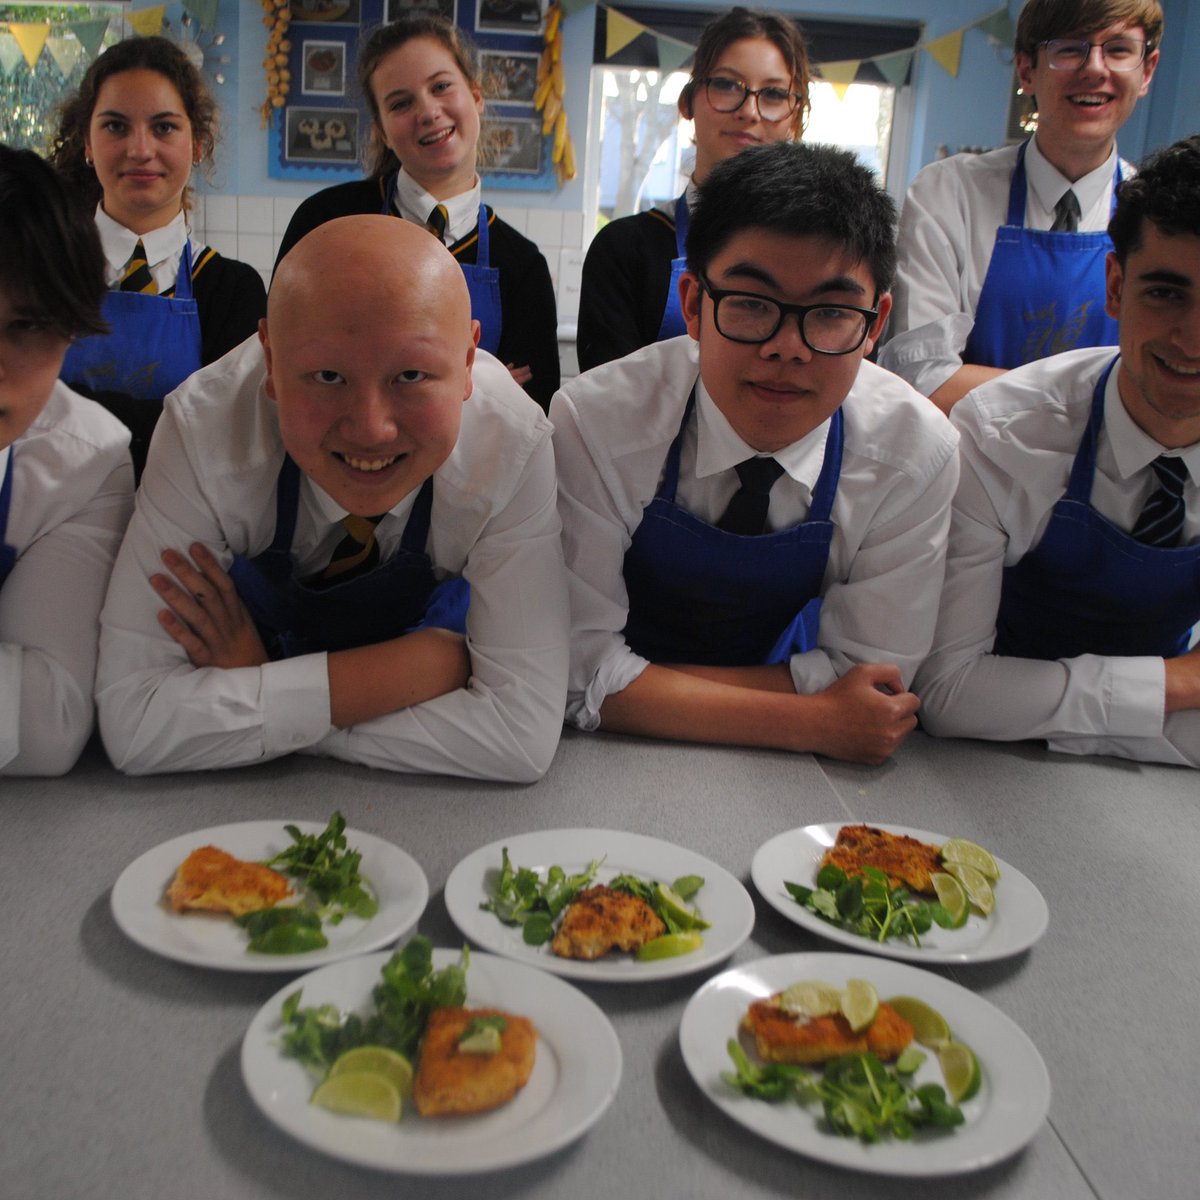 📻Recommend listening back @SheilaDillon @HenryDimbleby #ObesityPlan @jamieoliver @ChefsinSchools on @BBCFoodProg looking at the nations food in schools. We are proud to champion a Whole School approach to food @QueensTaunton making #schoolfood with ❤️ 👉 bit.ly/44Wquc0